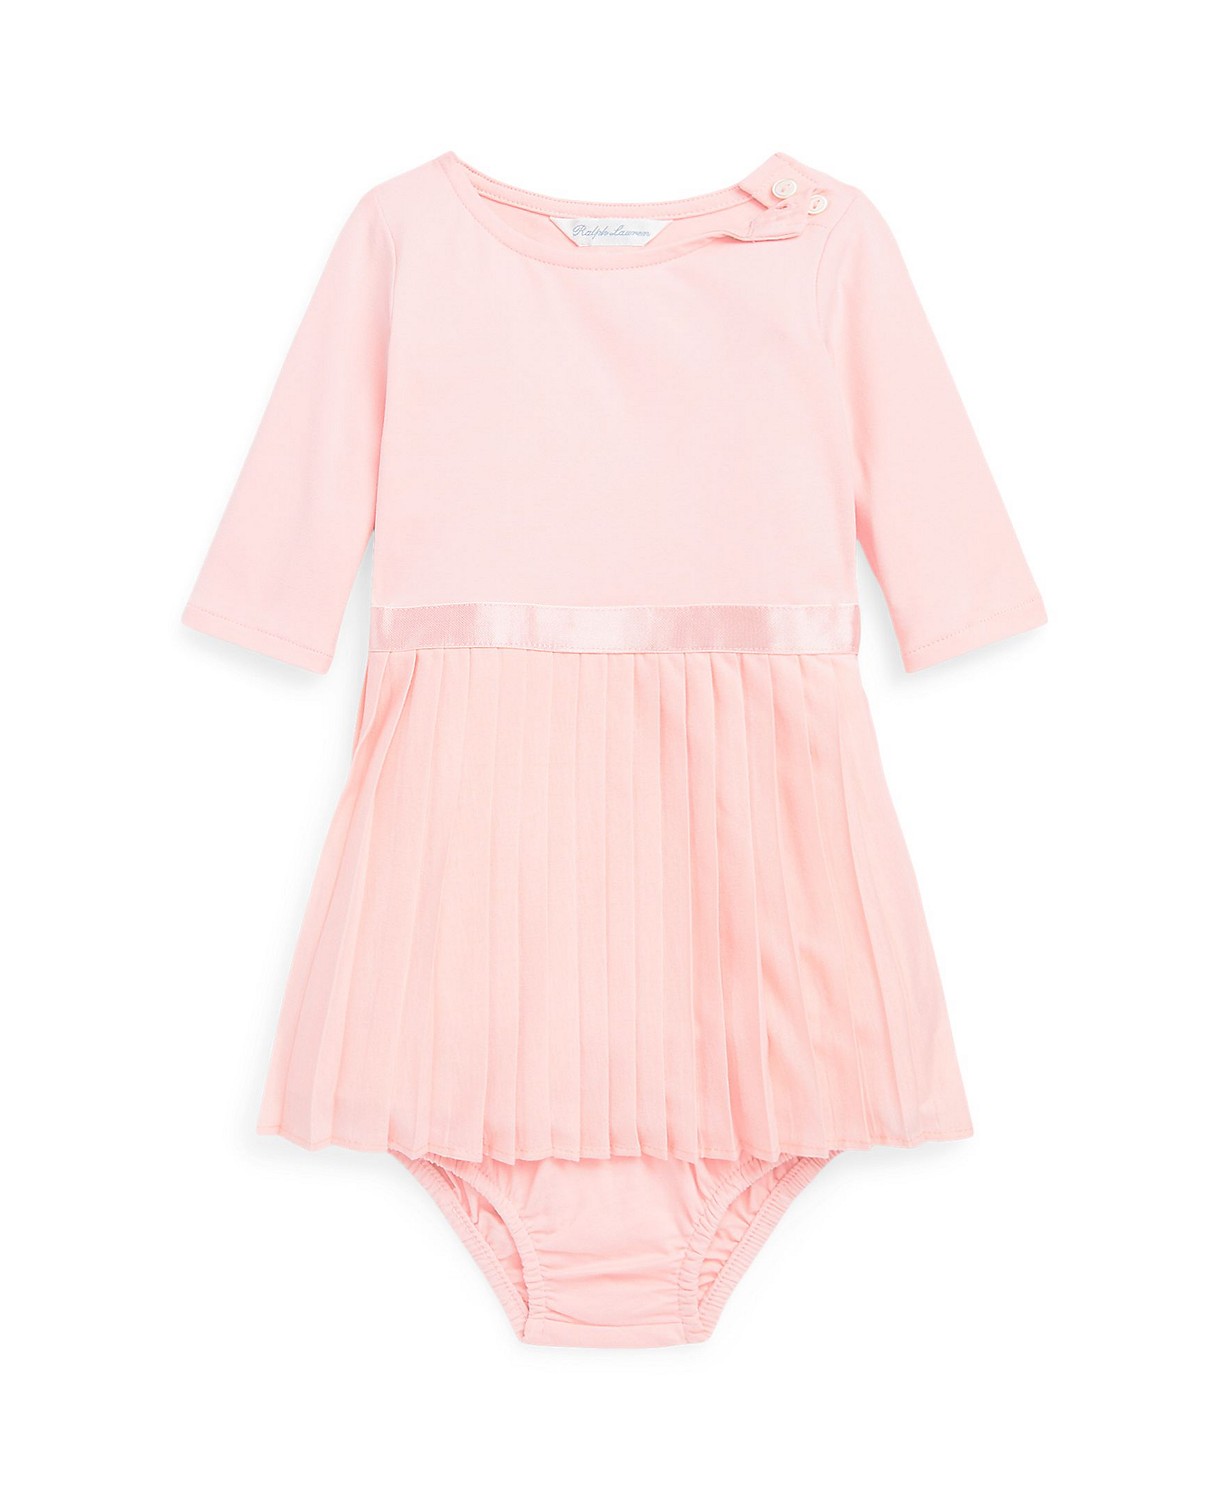 Baby Girls Pleated Stretch Jersey Dress and Bloomer, 2 Piece Set